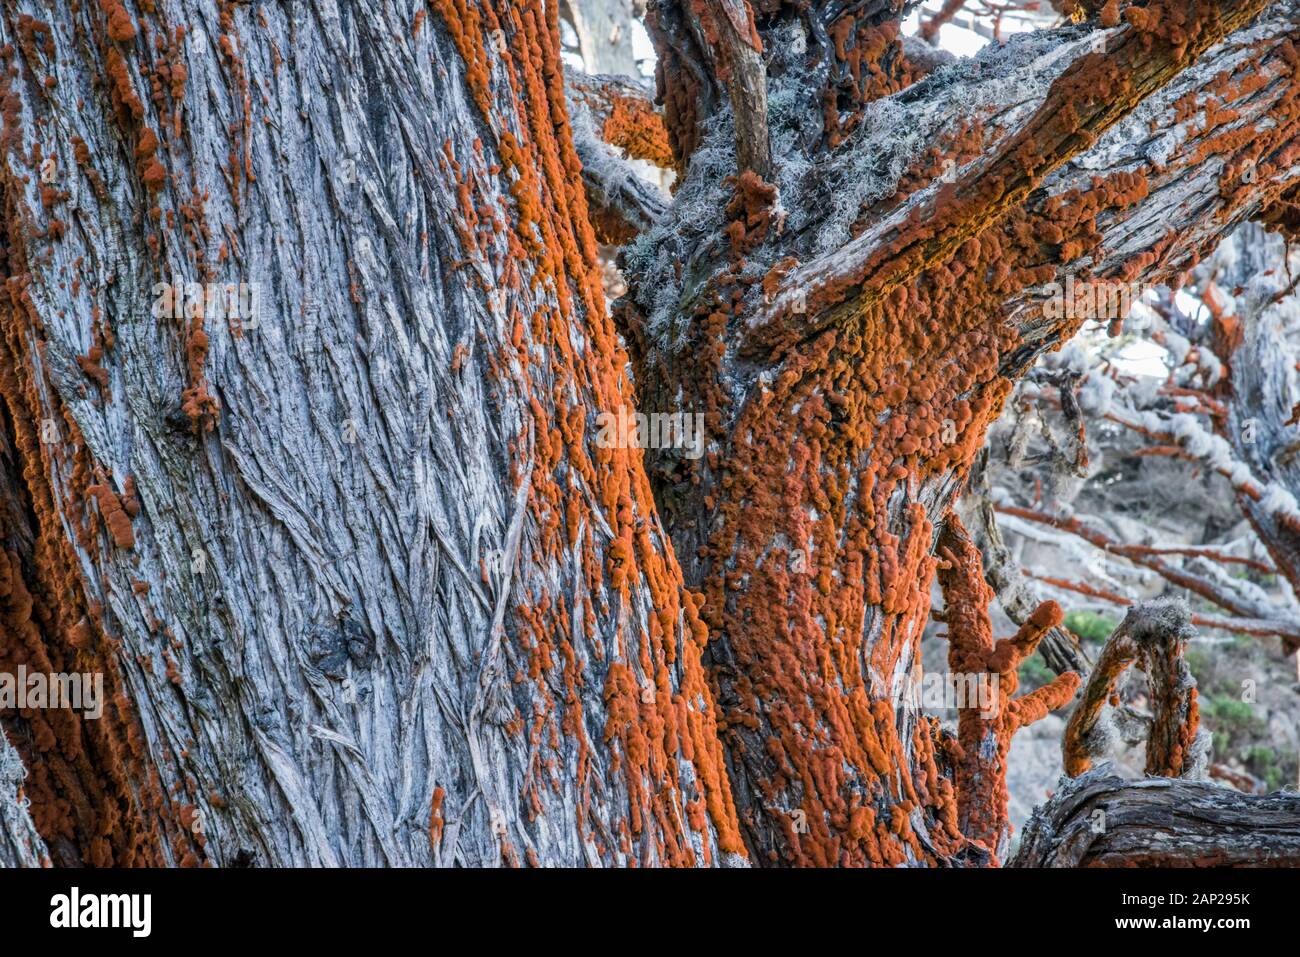 Colourful algae growing on trees at Point Lobos State Natural Reserve, California Stock Photo